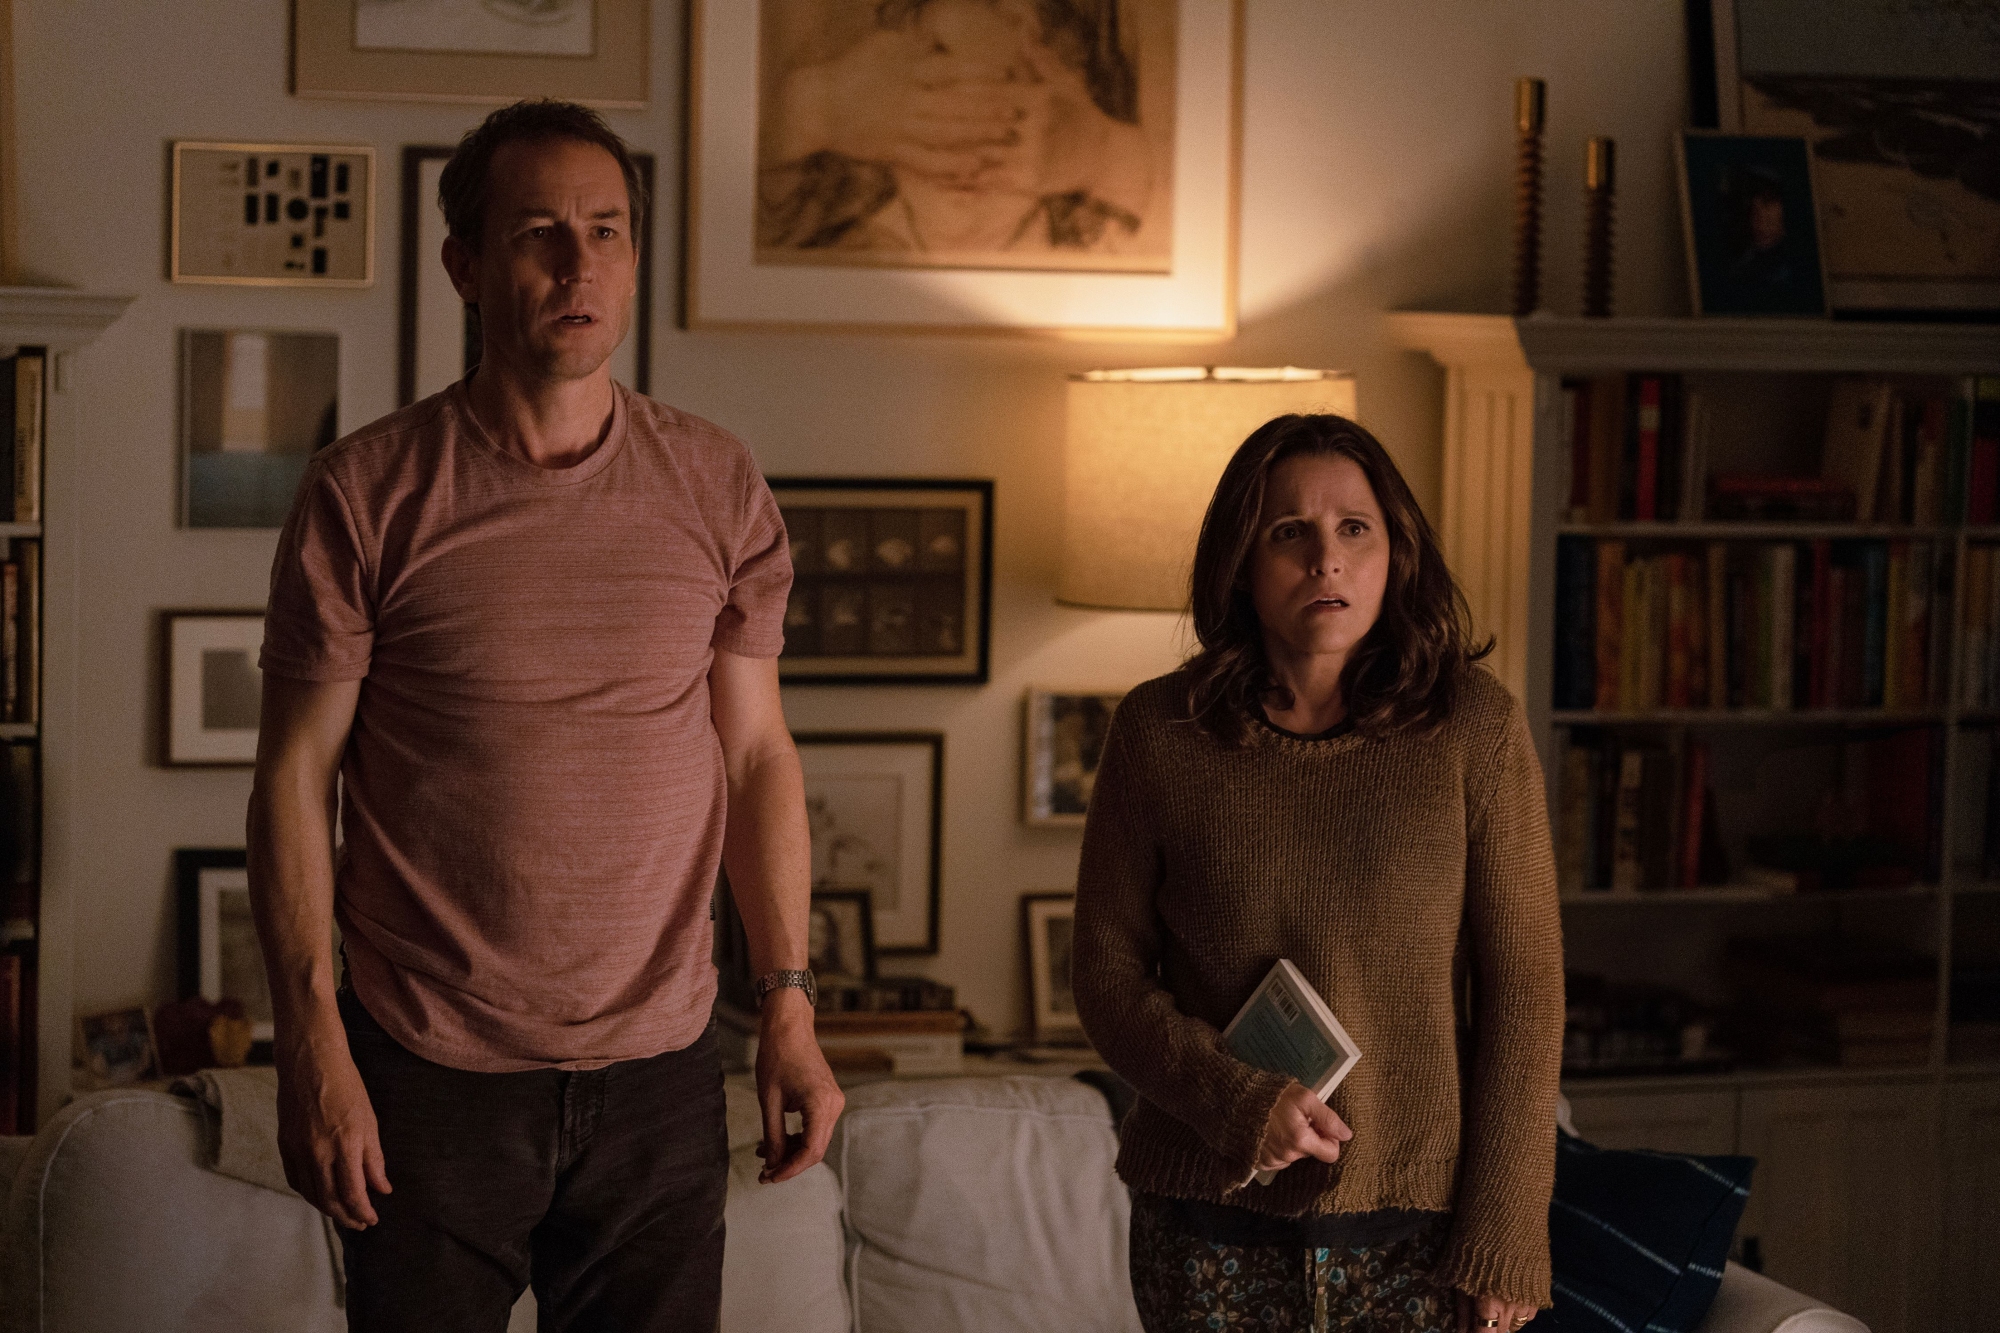 'You Hurt My Feelings' Tobias Menzies as Don and Julia Louis-Dreyfus as Beth looking surprised standing in their living room in front of their couch